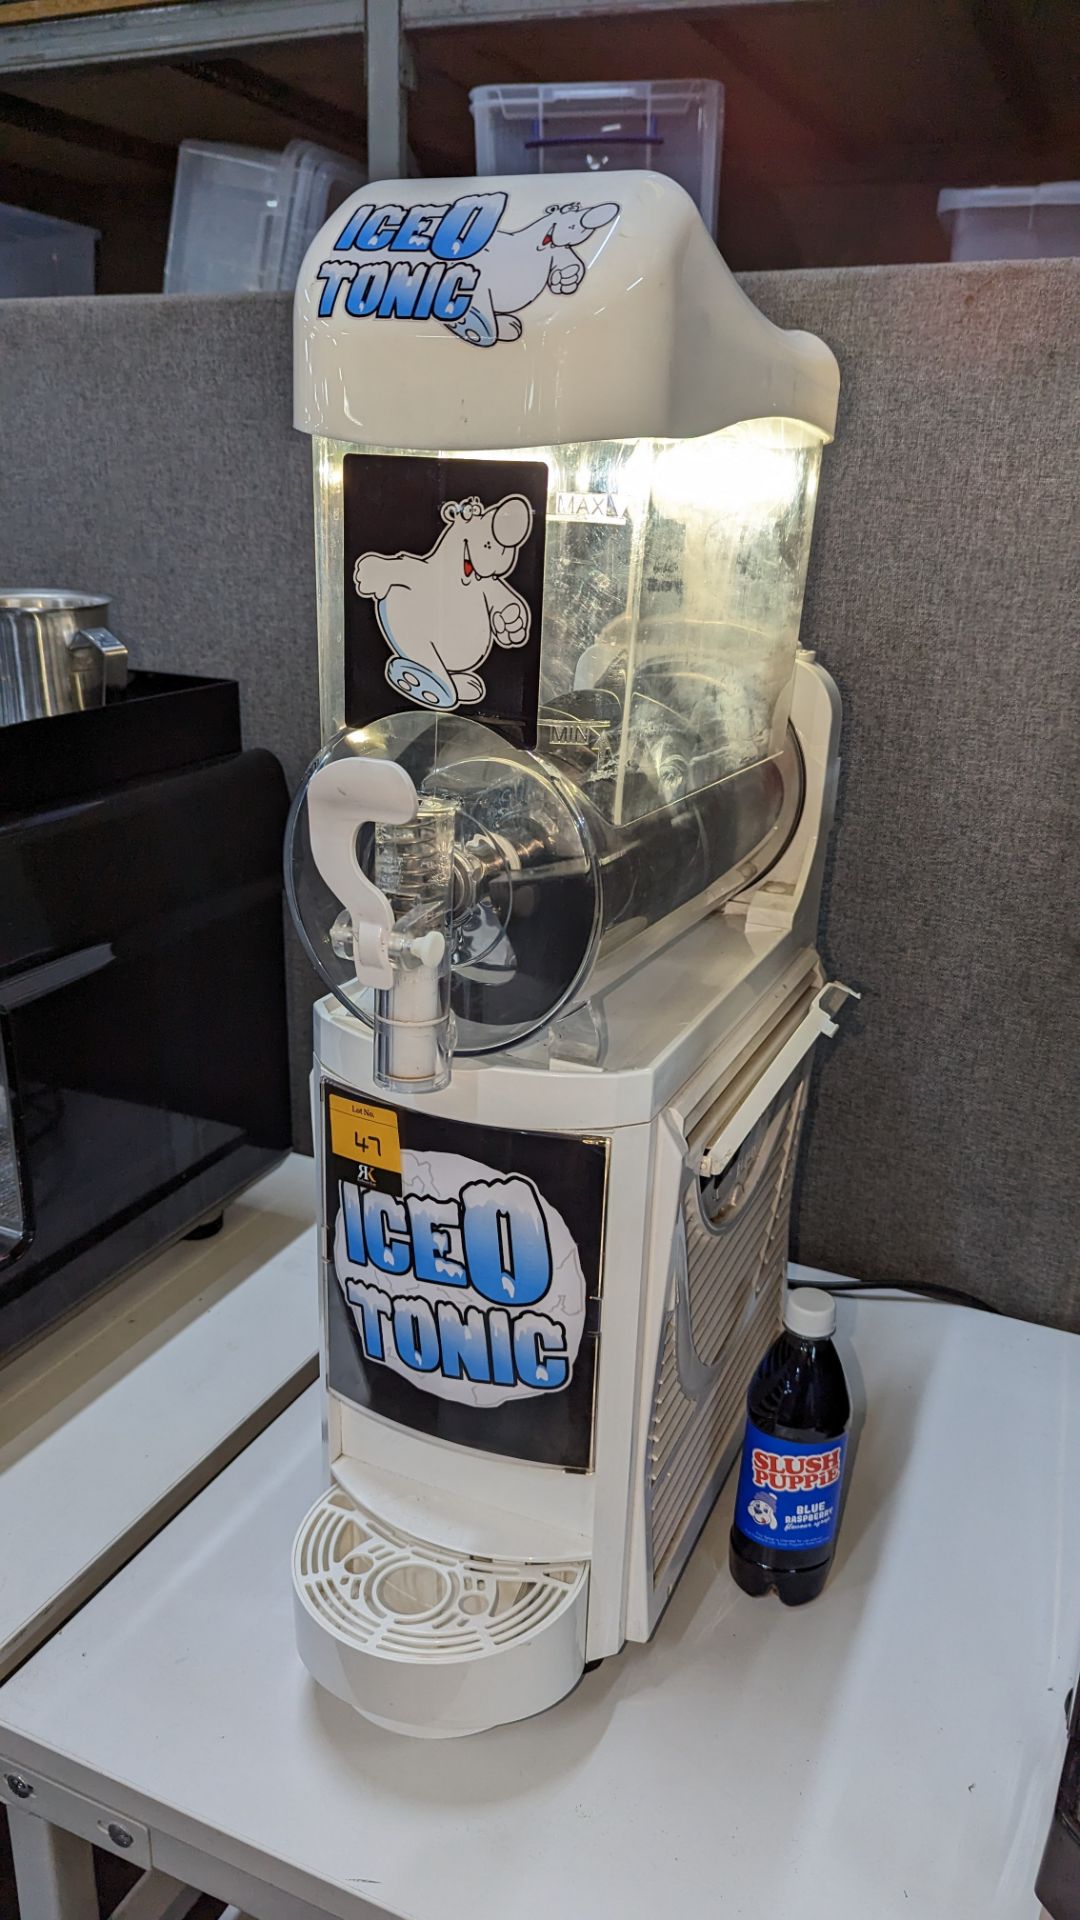 2019 slush drink machine, branded Iceotonic. We cannot find a date of manufacture plaque on the mac